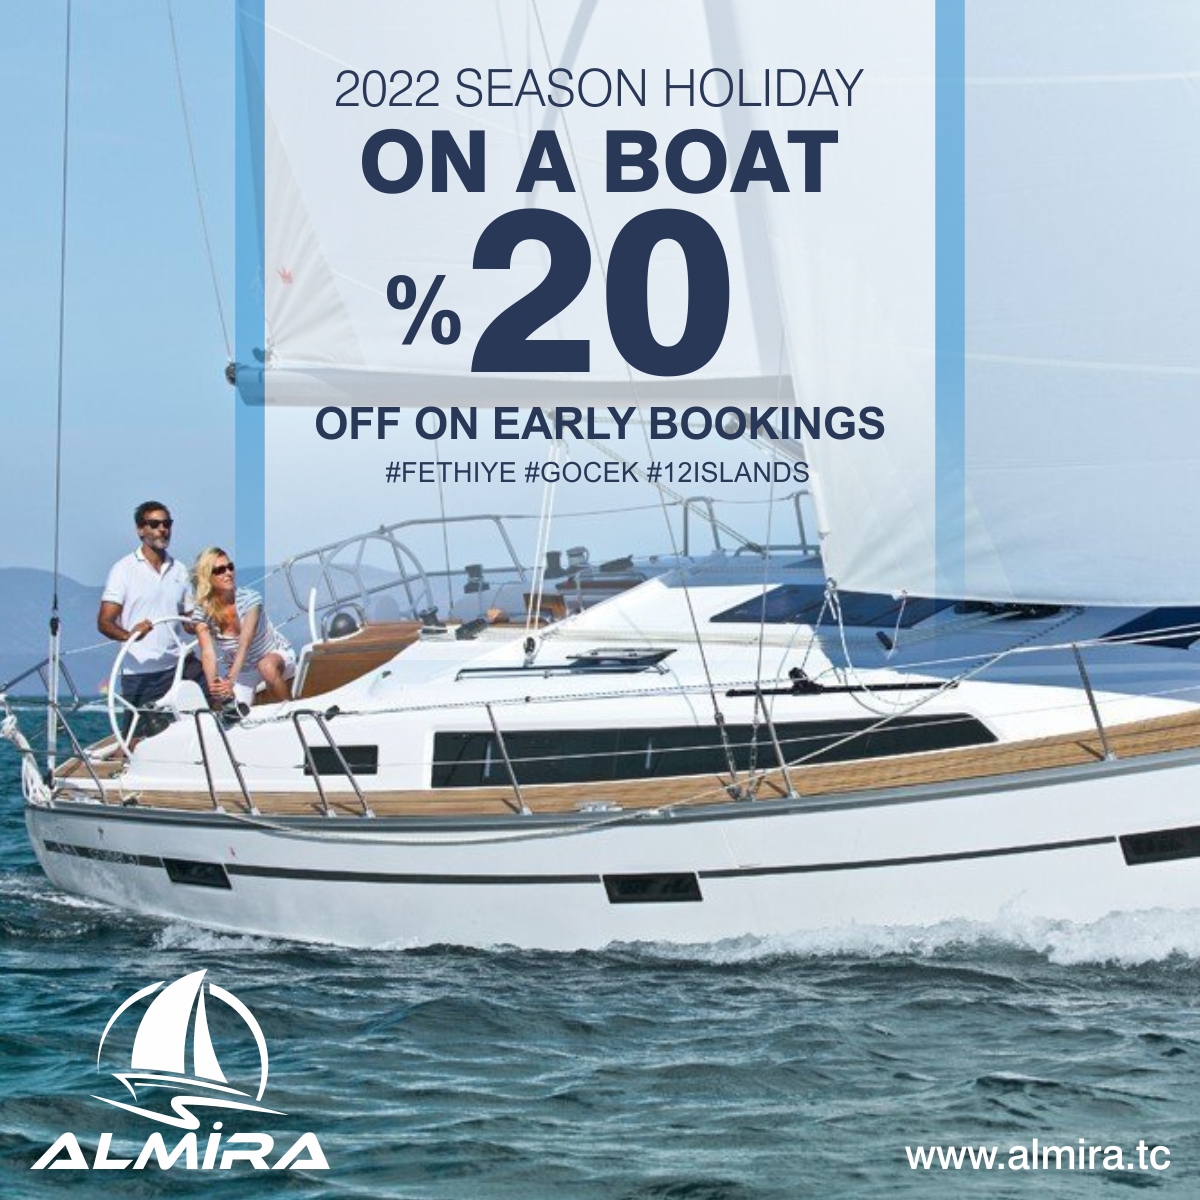 %20 early booking discount on sail rentals